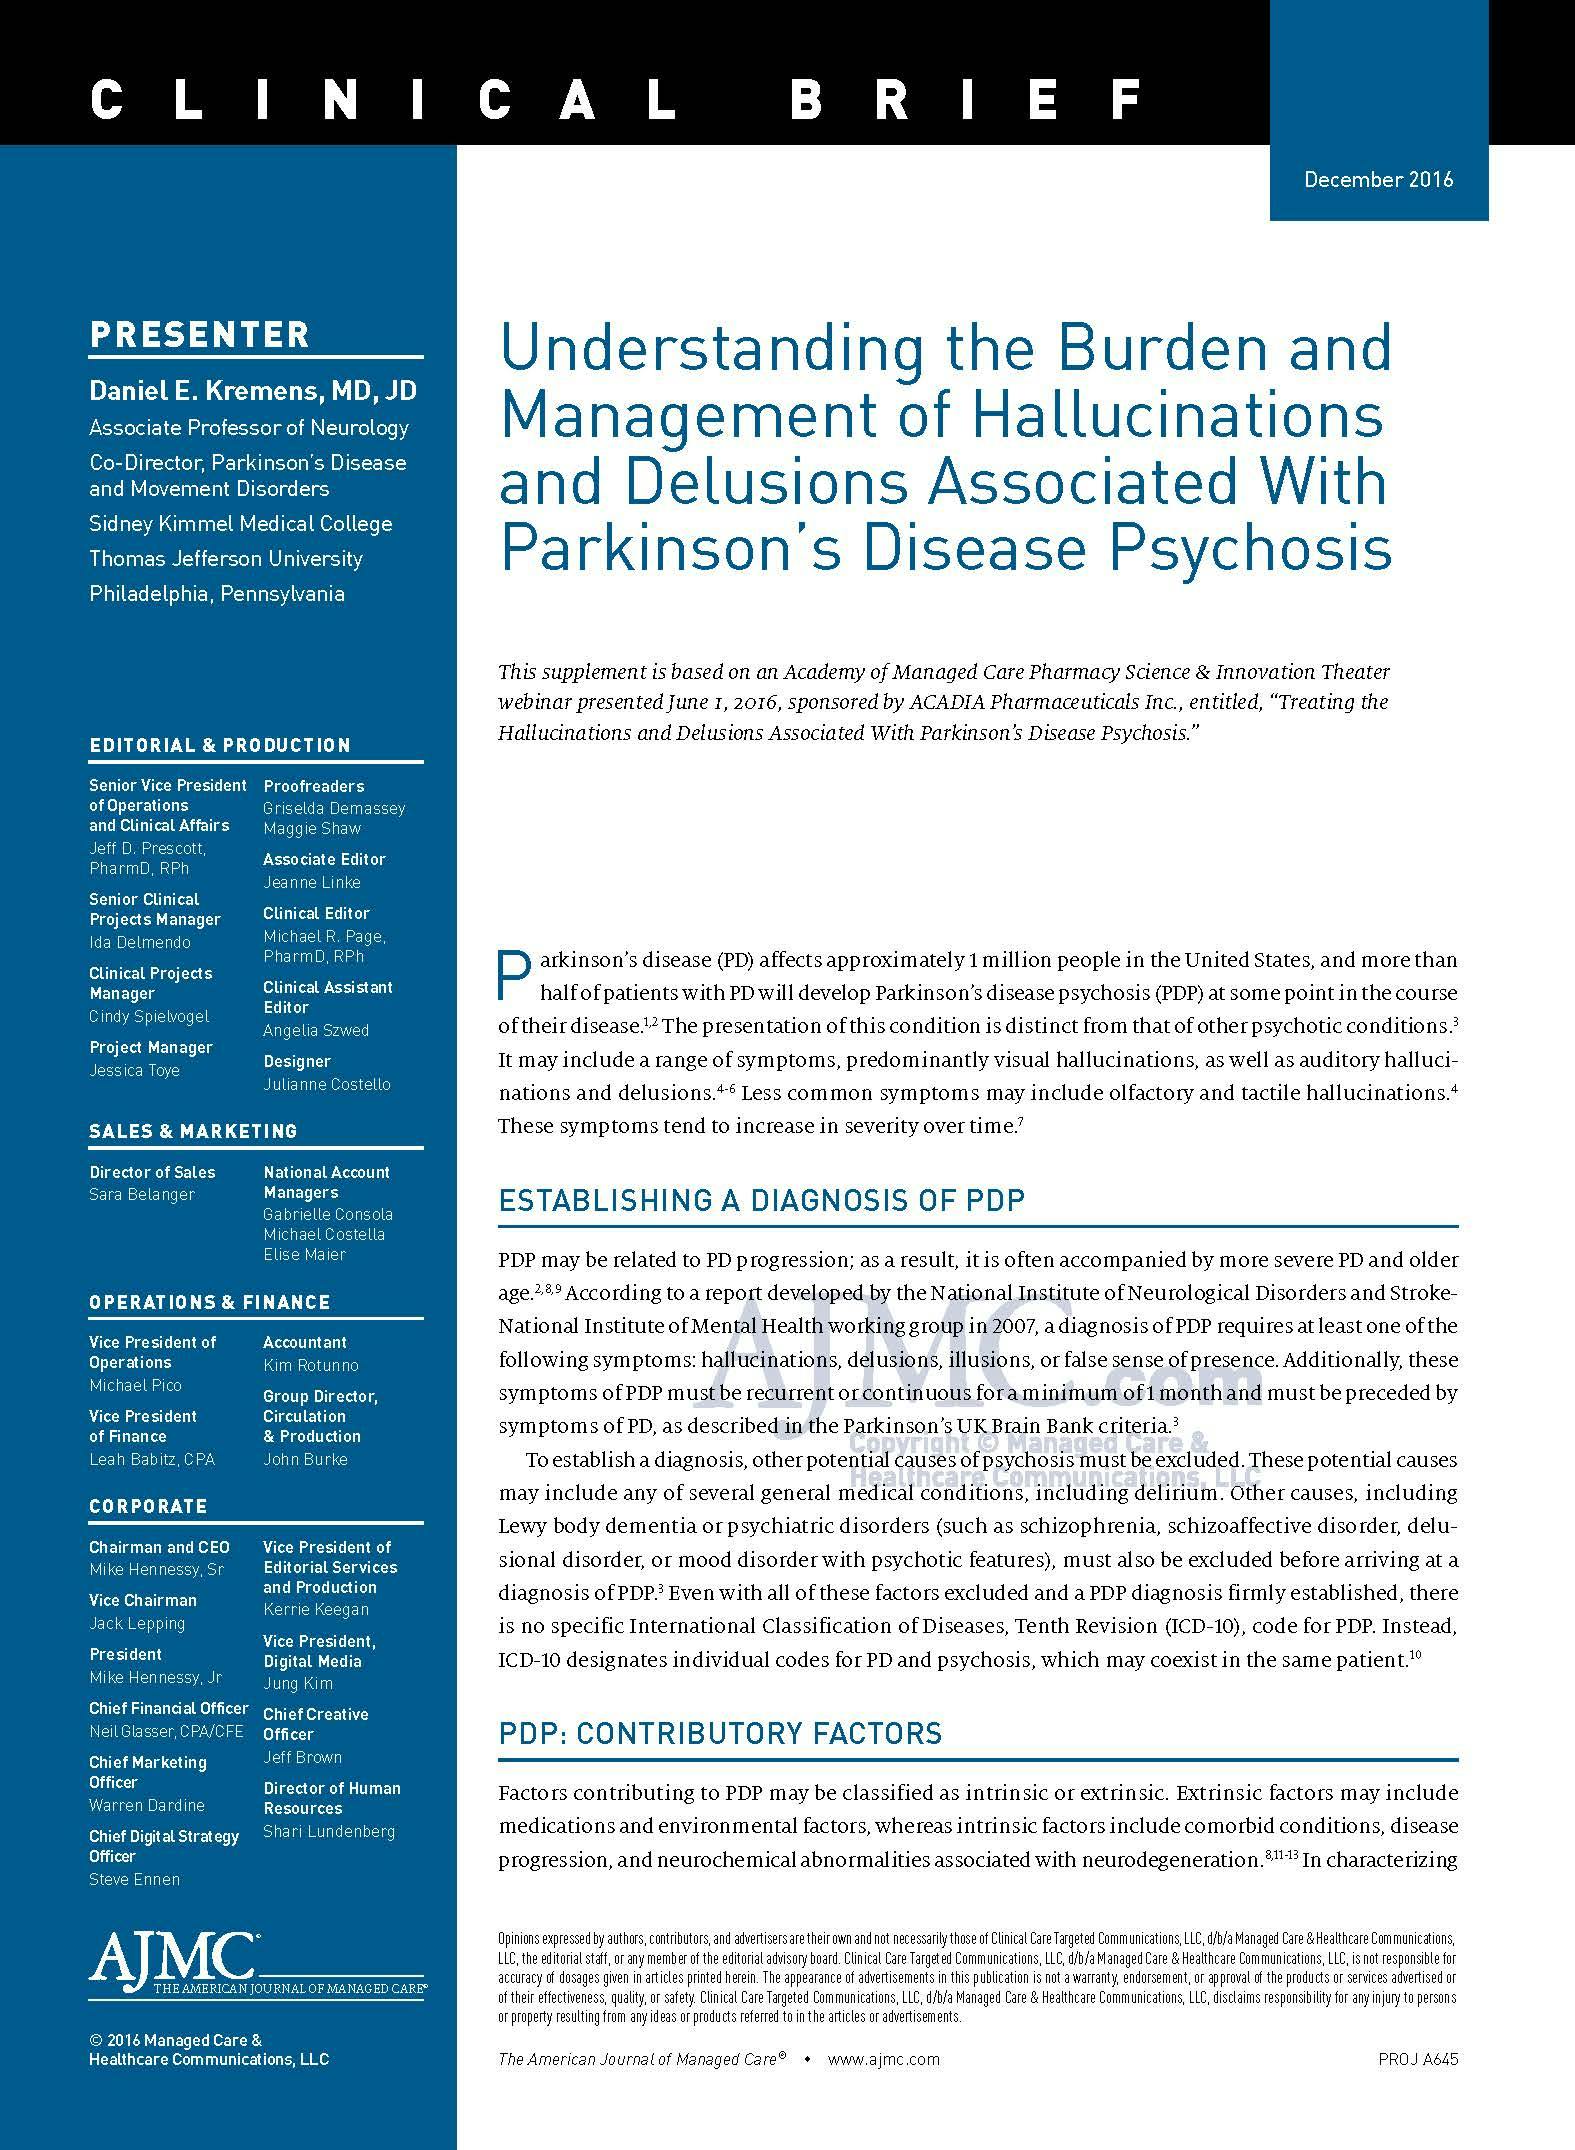 Understanding the Burden and Management of Hallucinations and Delusions Associated With Parkinsonâ€™